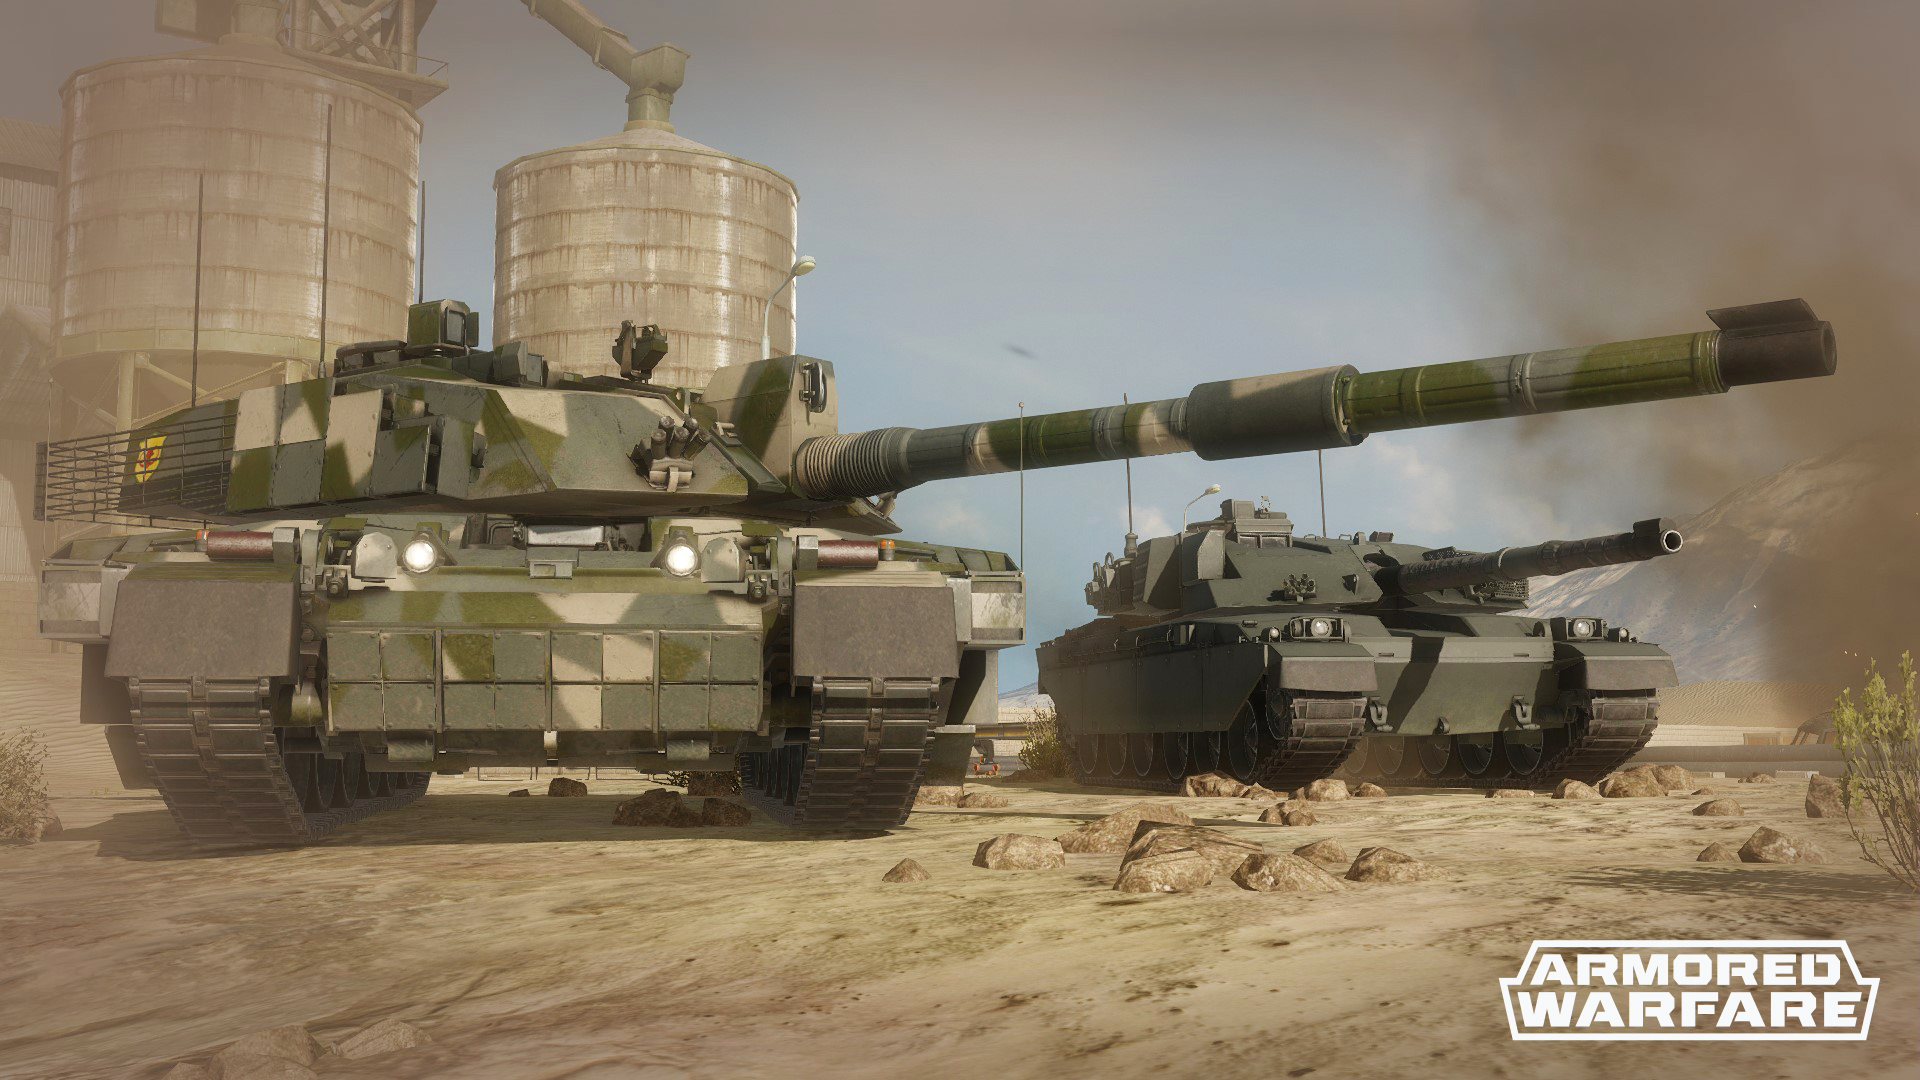 Armored Warfare is Coming Soon to Xbox One